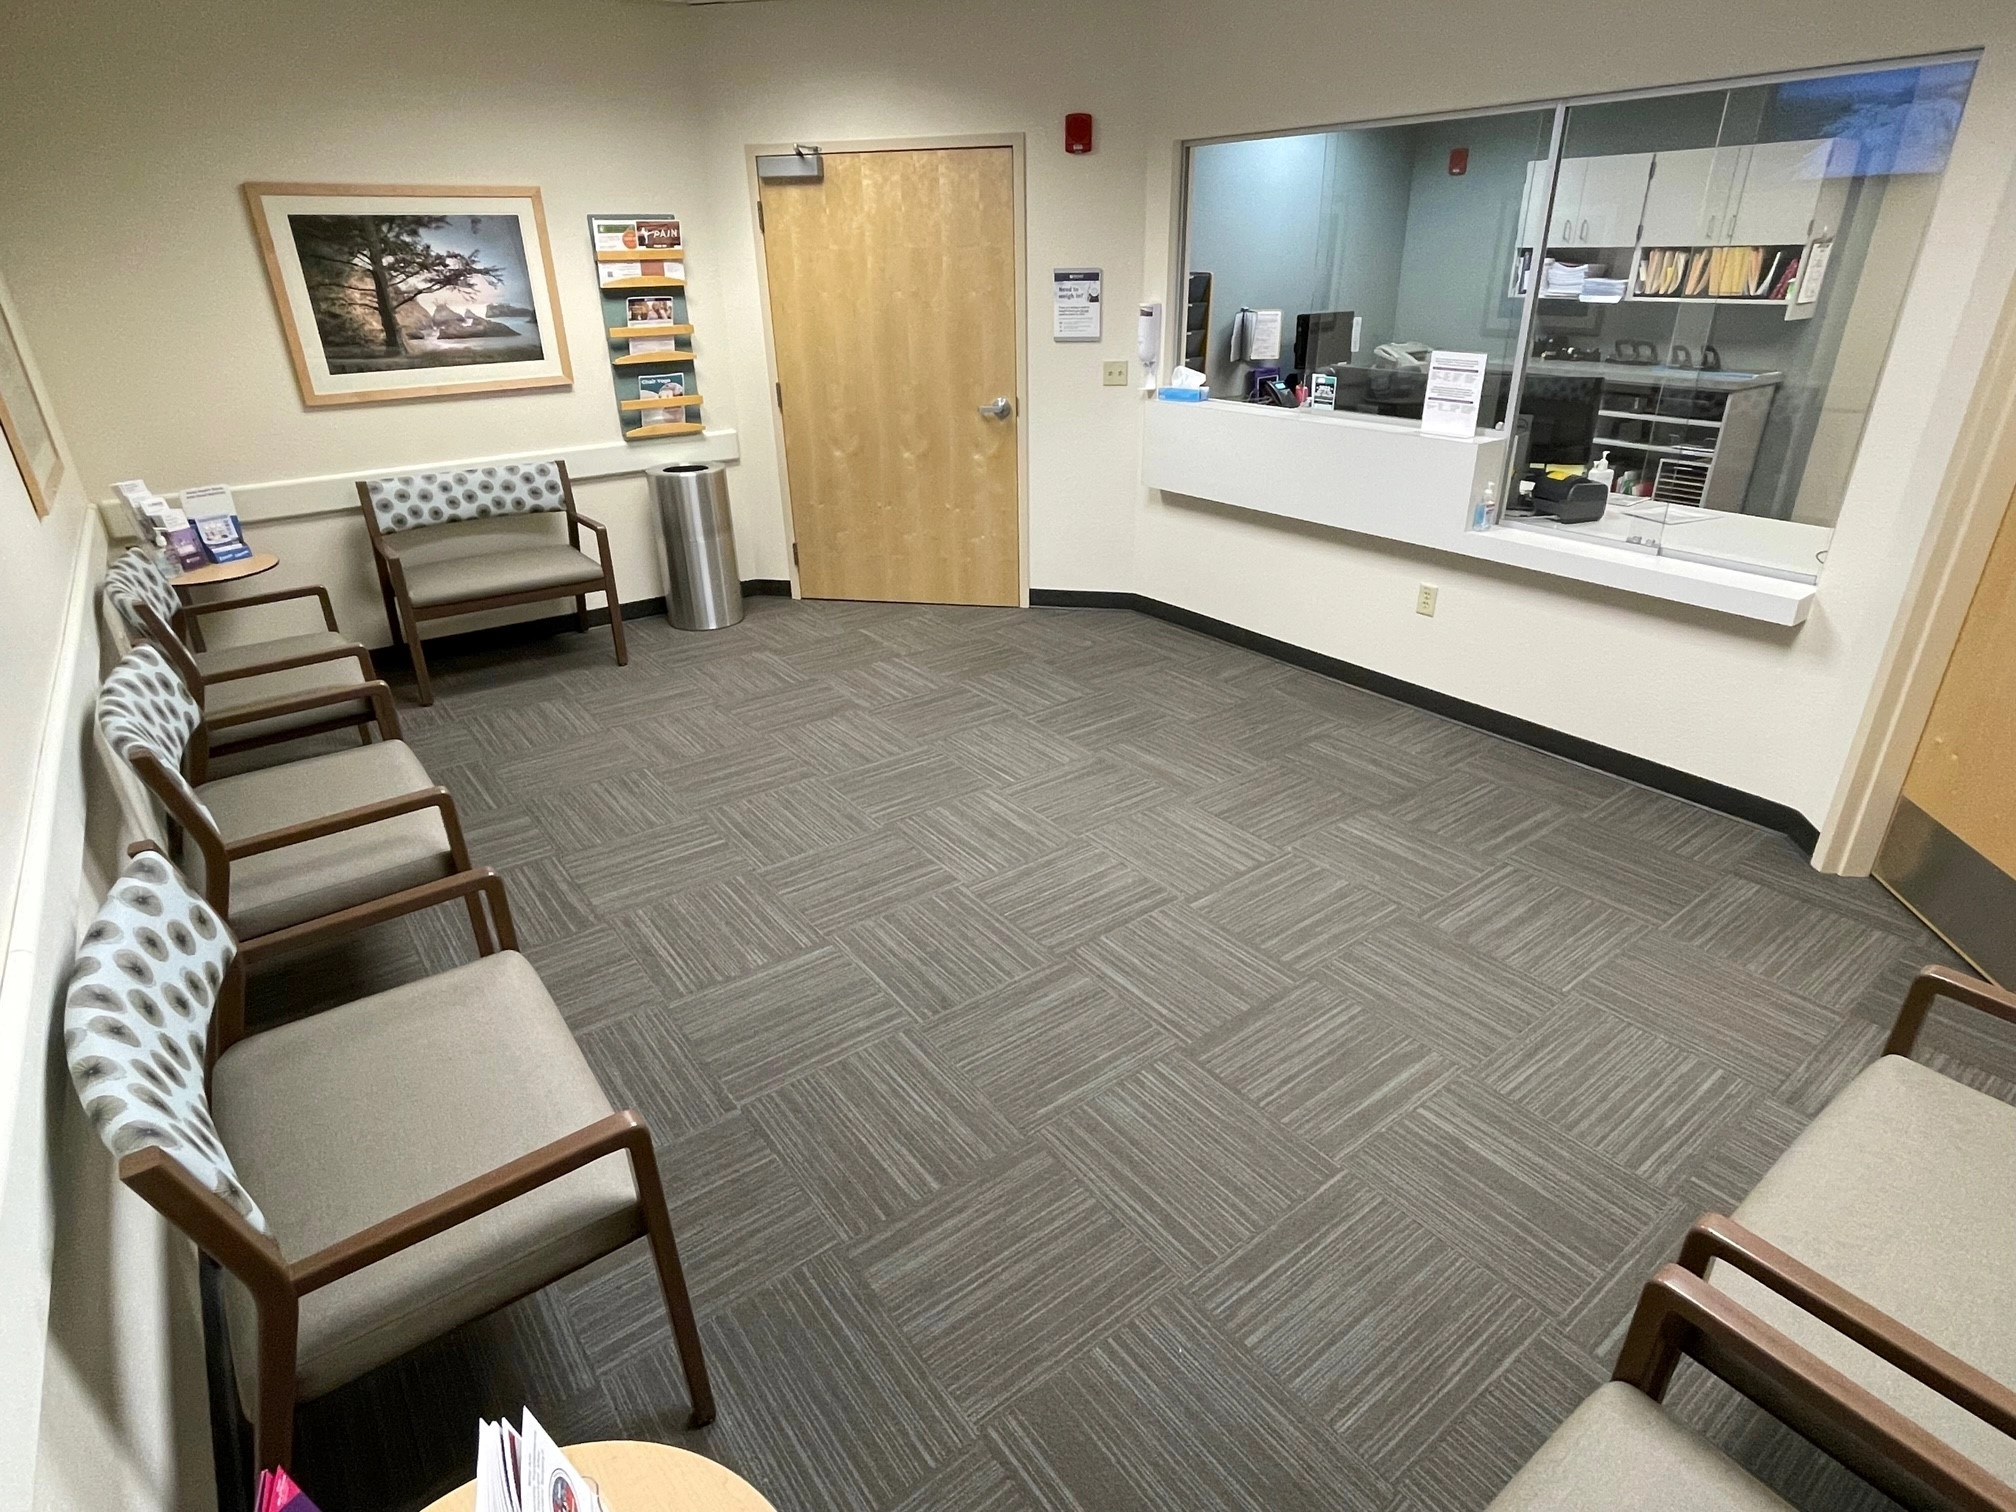 View of the Bariatric surgery center waiting room.